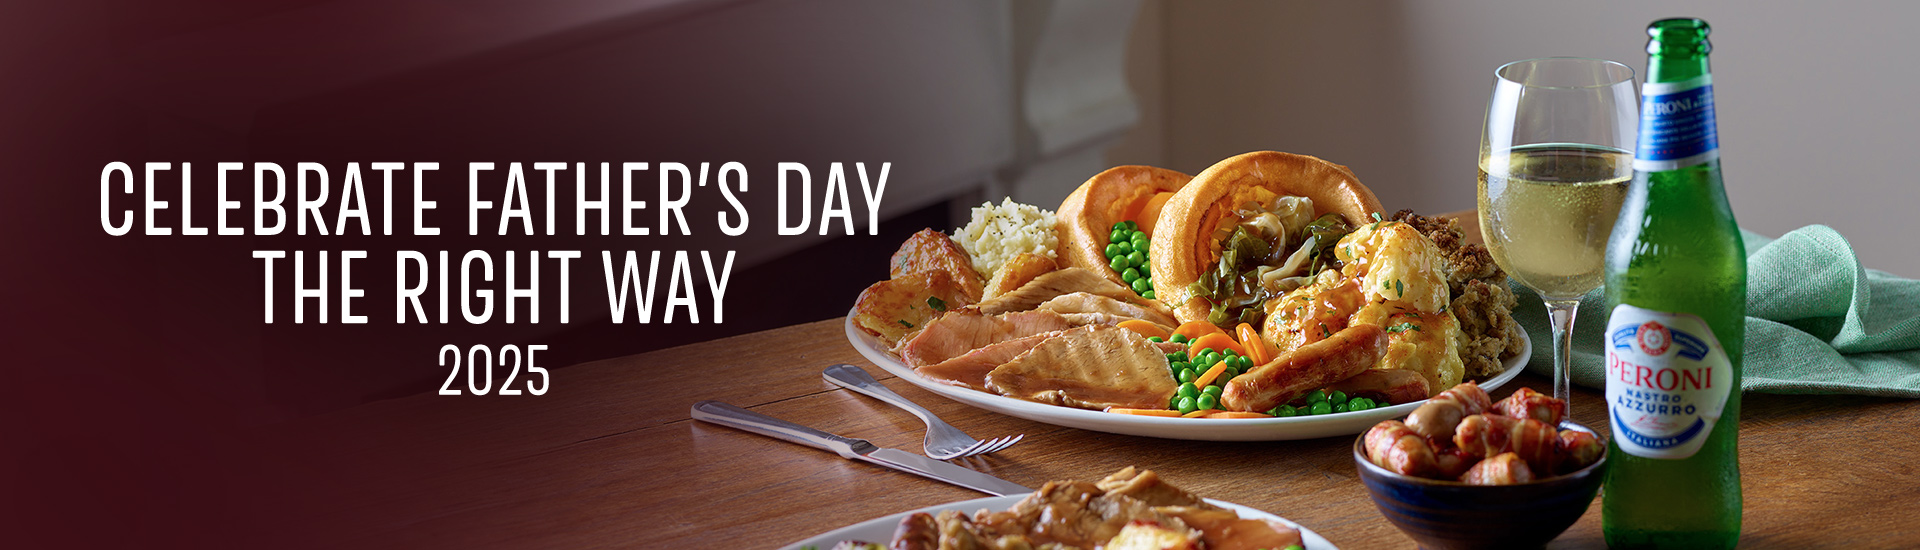 Father’s day carvery in Rotherham